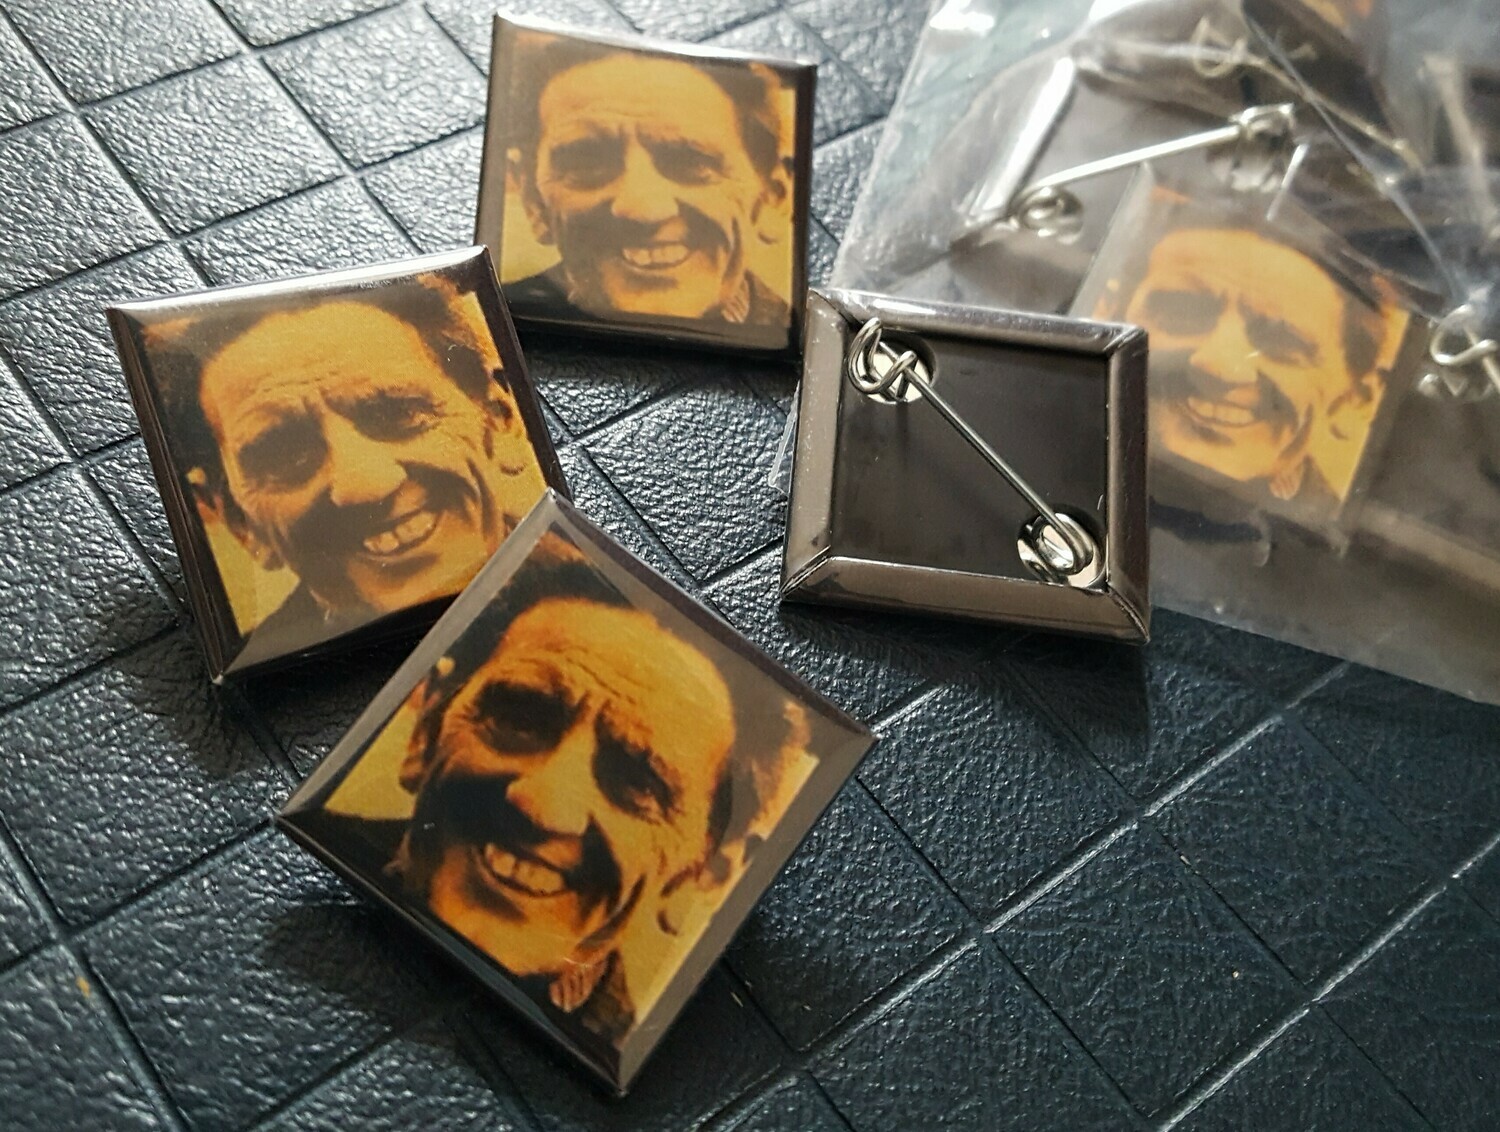 New! Jimmy pin badges